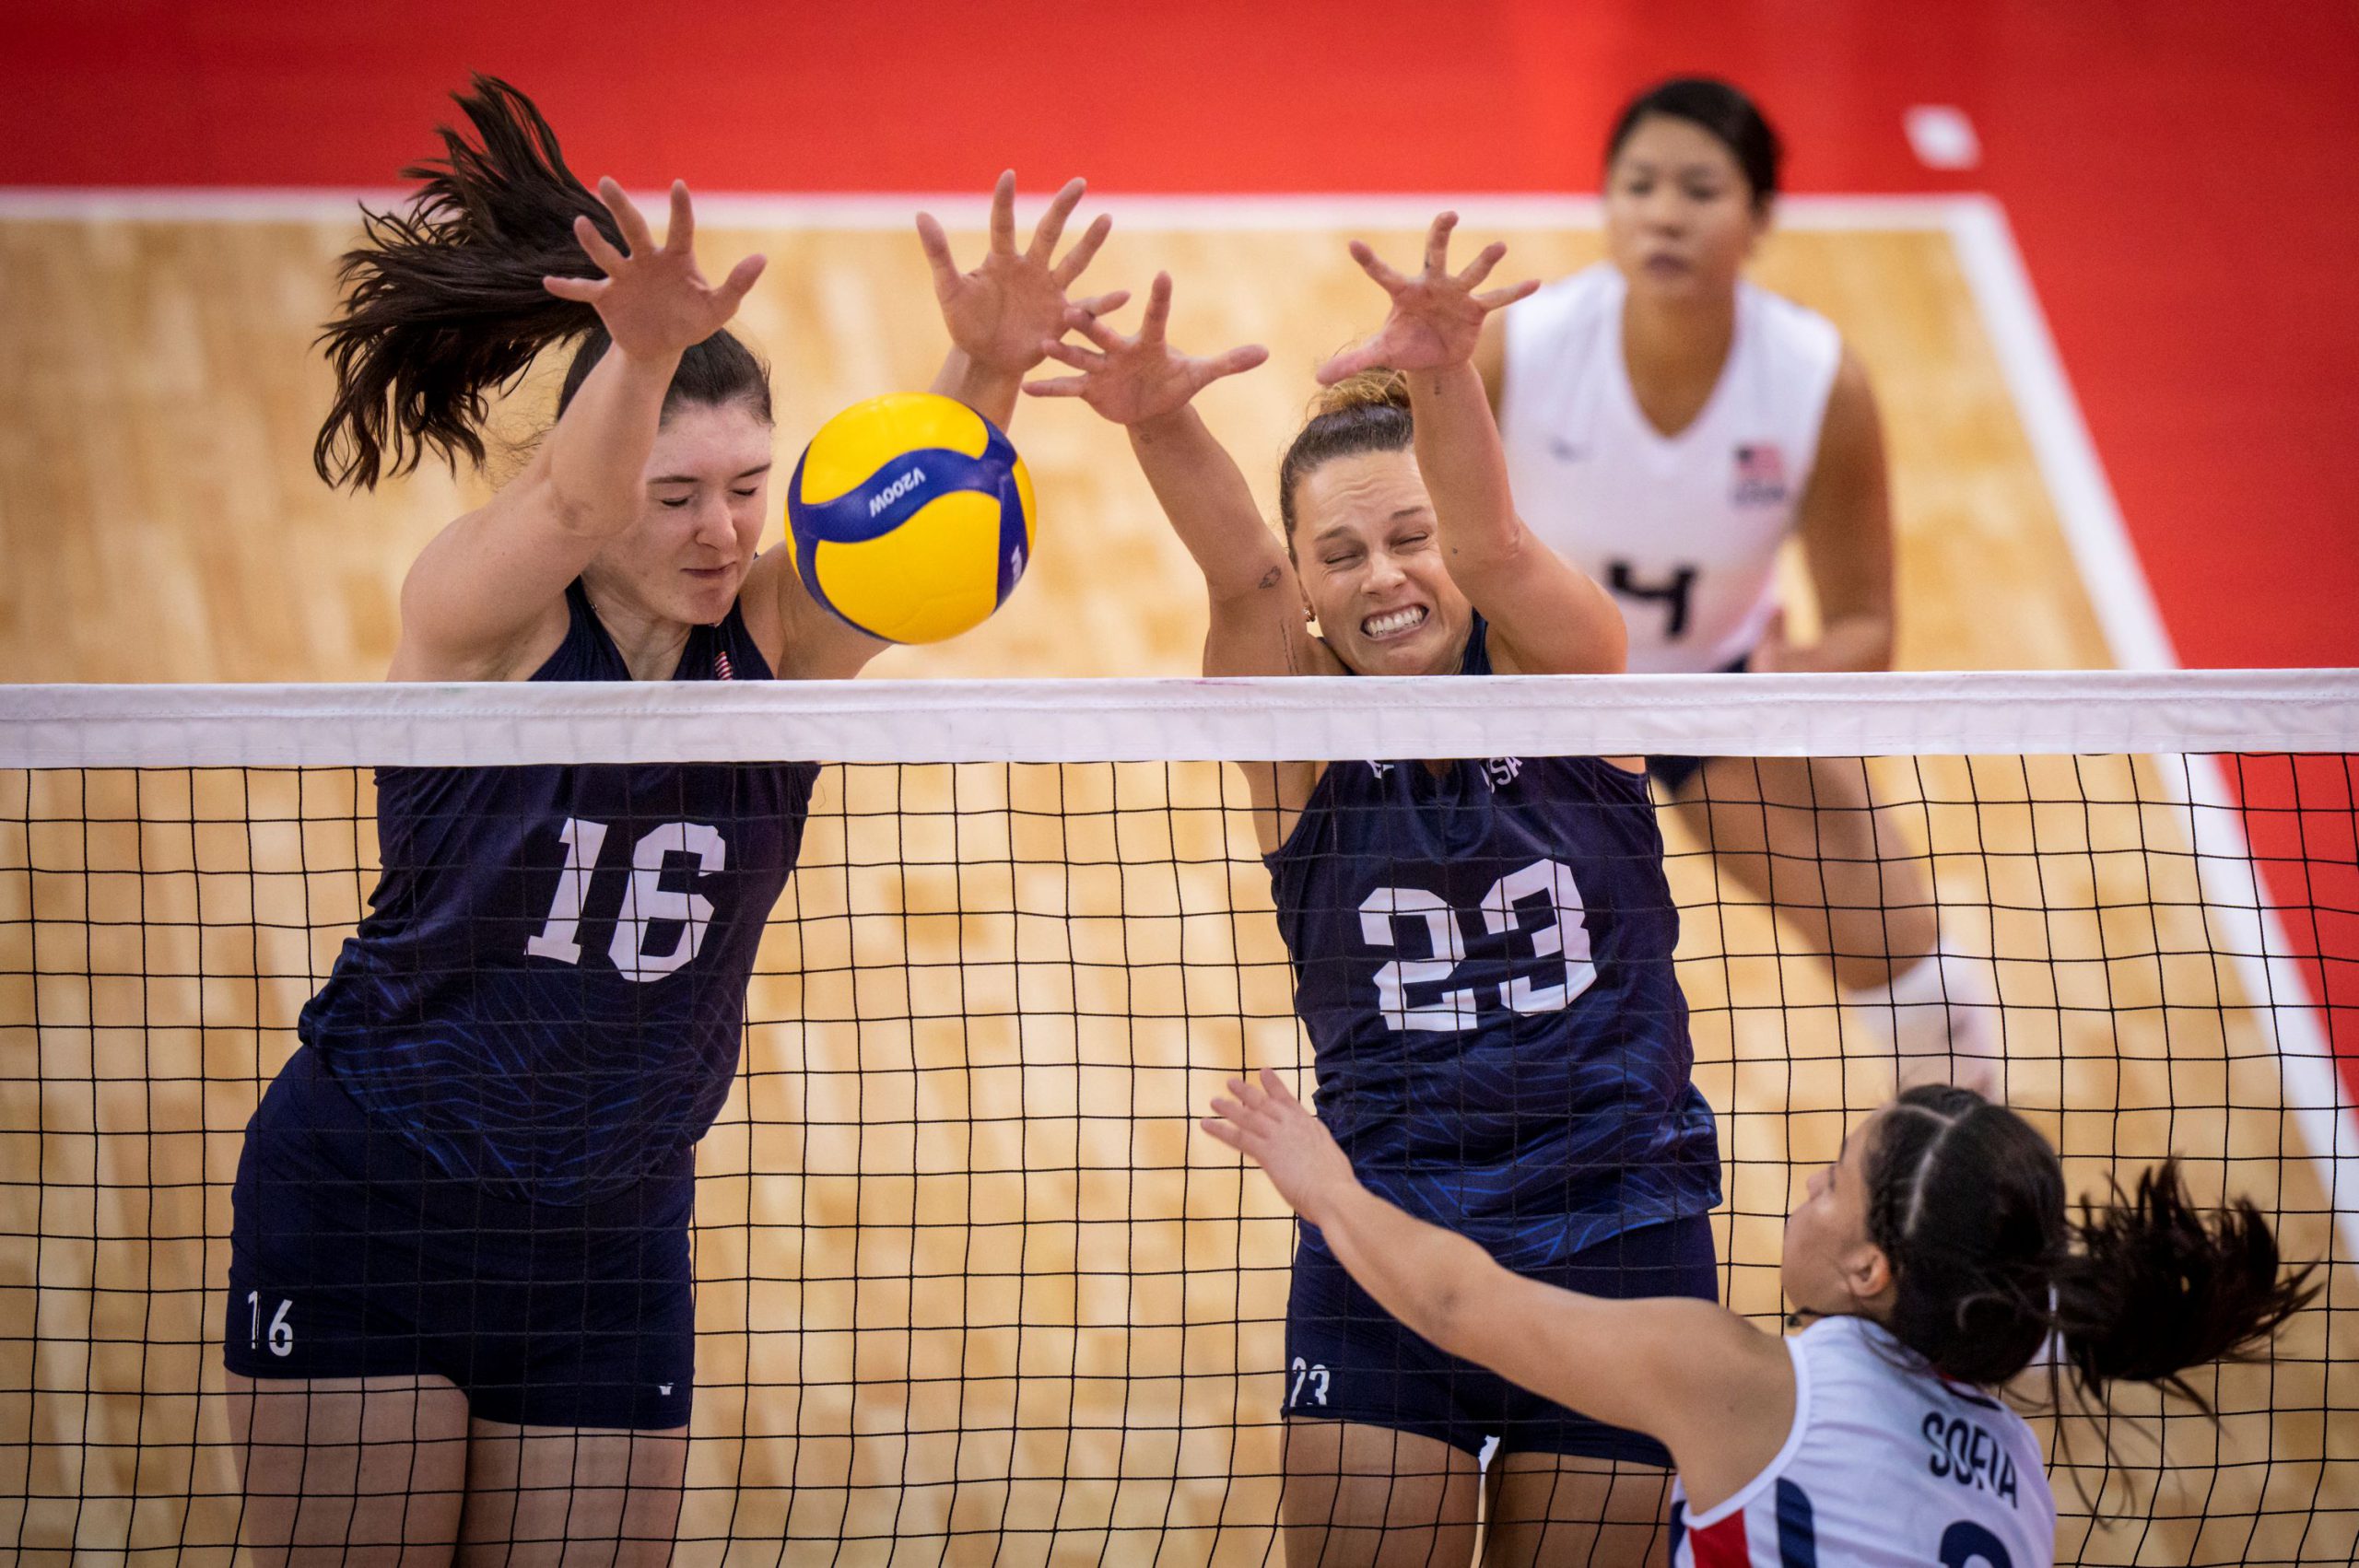 USA opens NORCECA Championship with a dominant win 